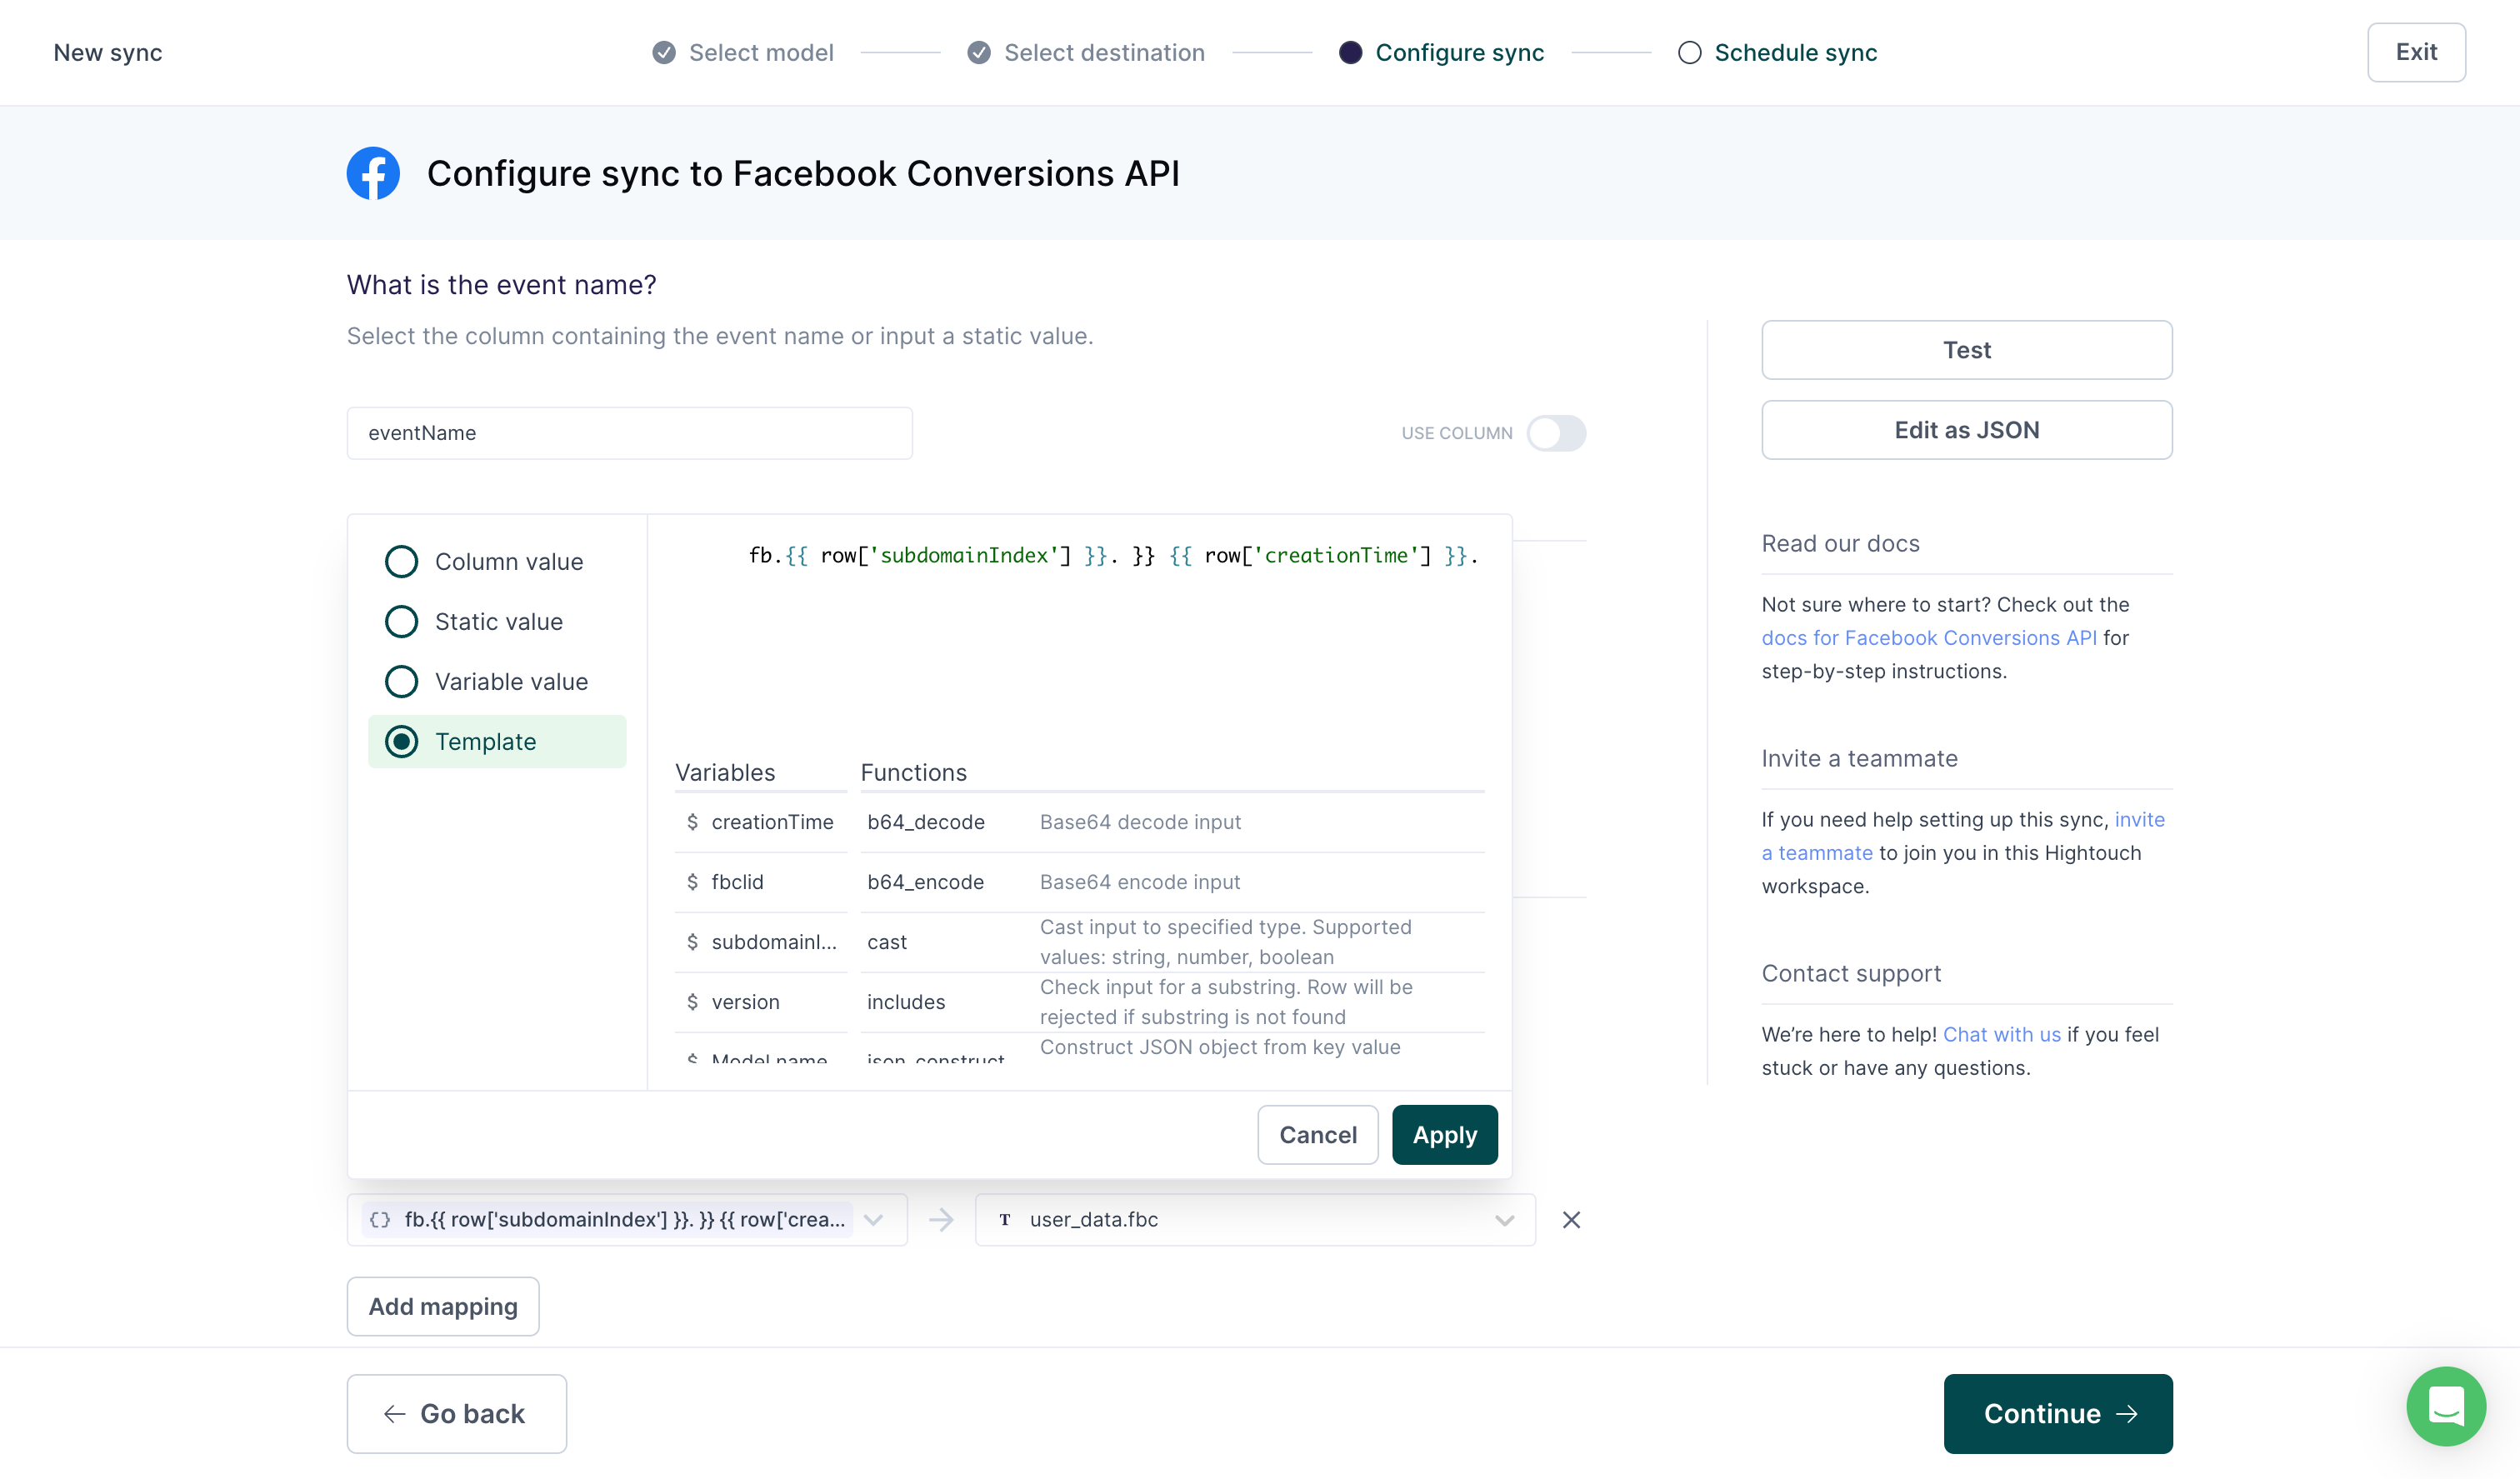 configuring a Hightouch sync to the Facebook Conversions API